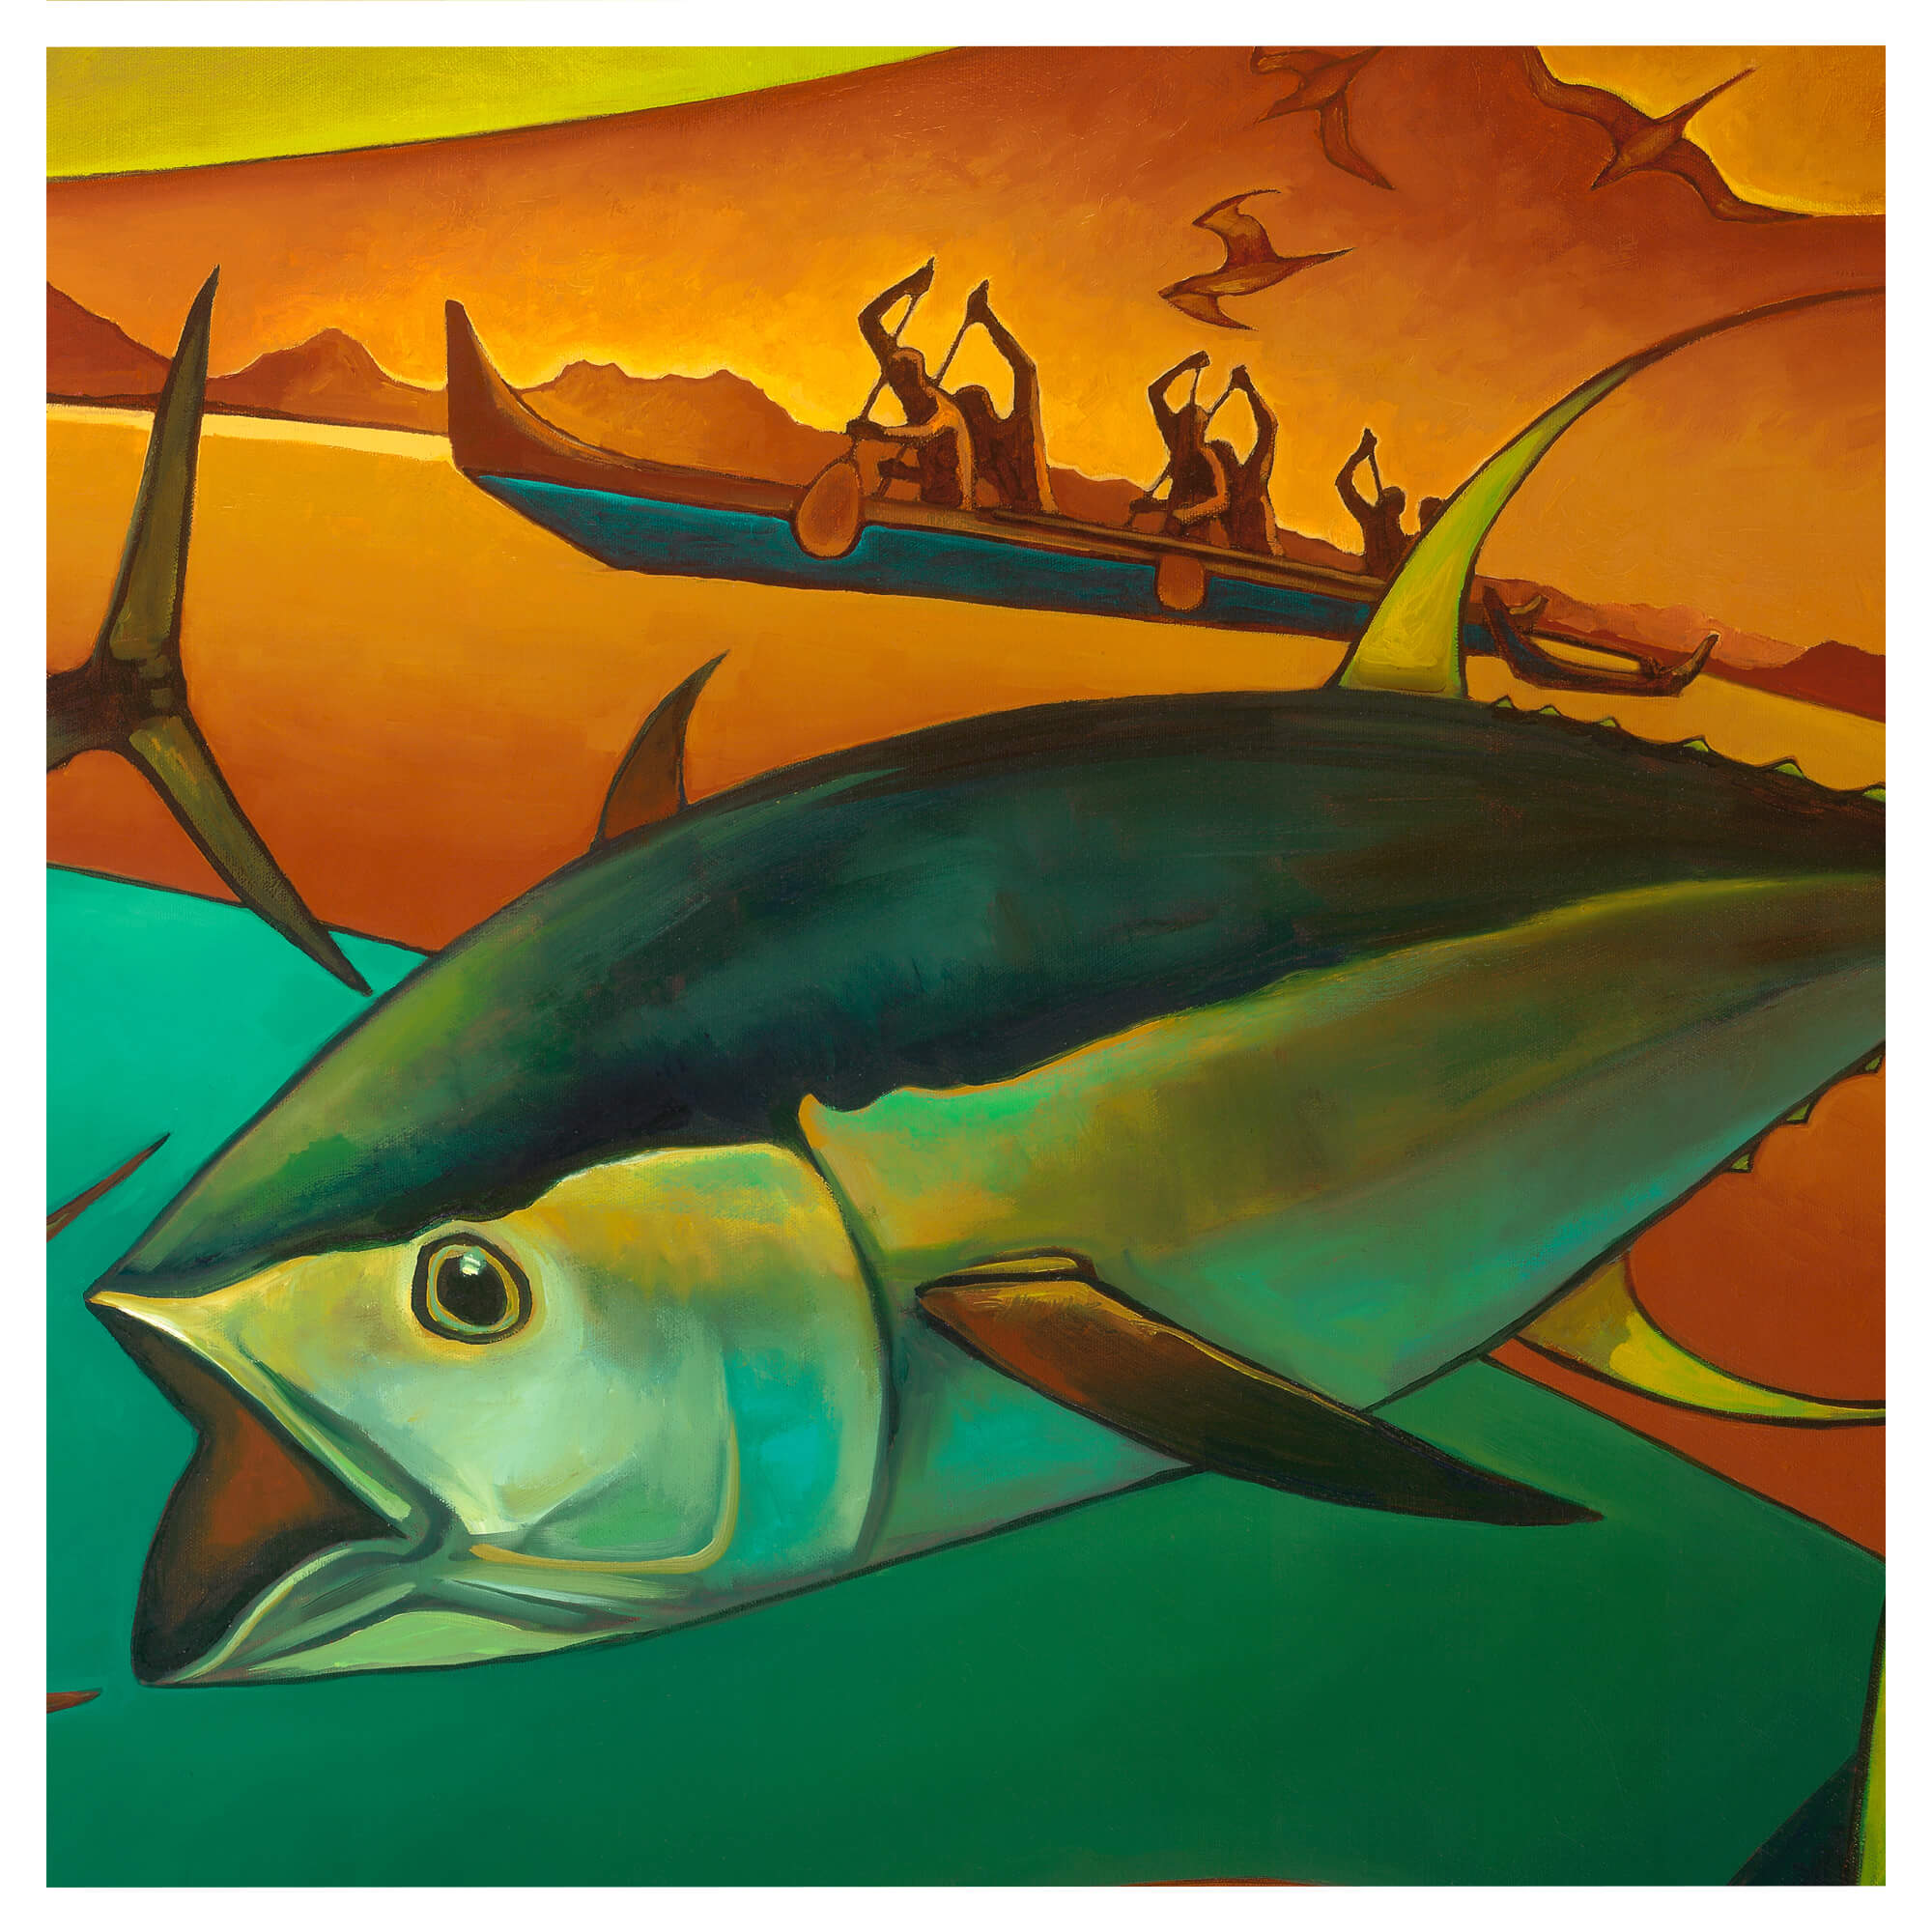 A large tuba fish and men in a boat by Hawaii artist Colin Redican